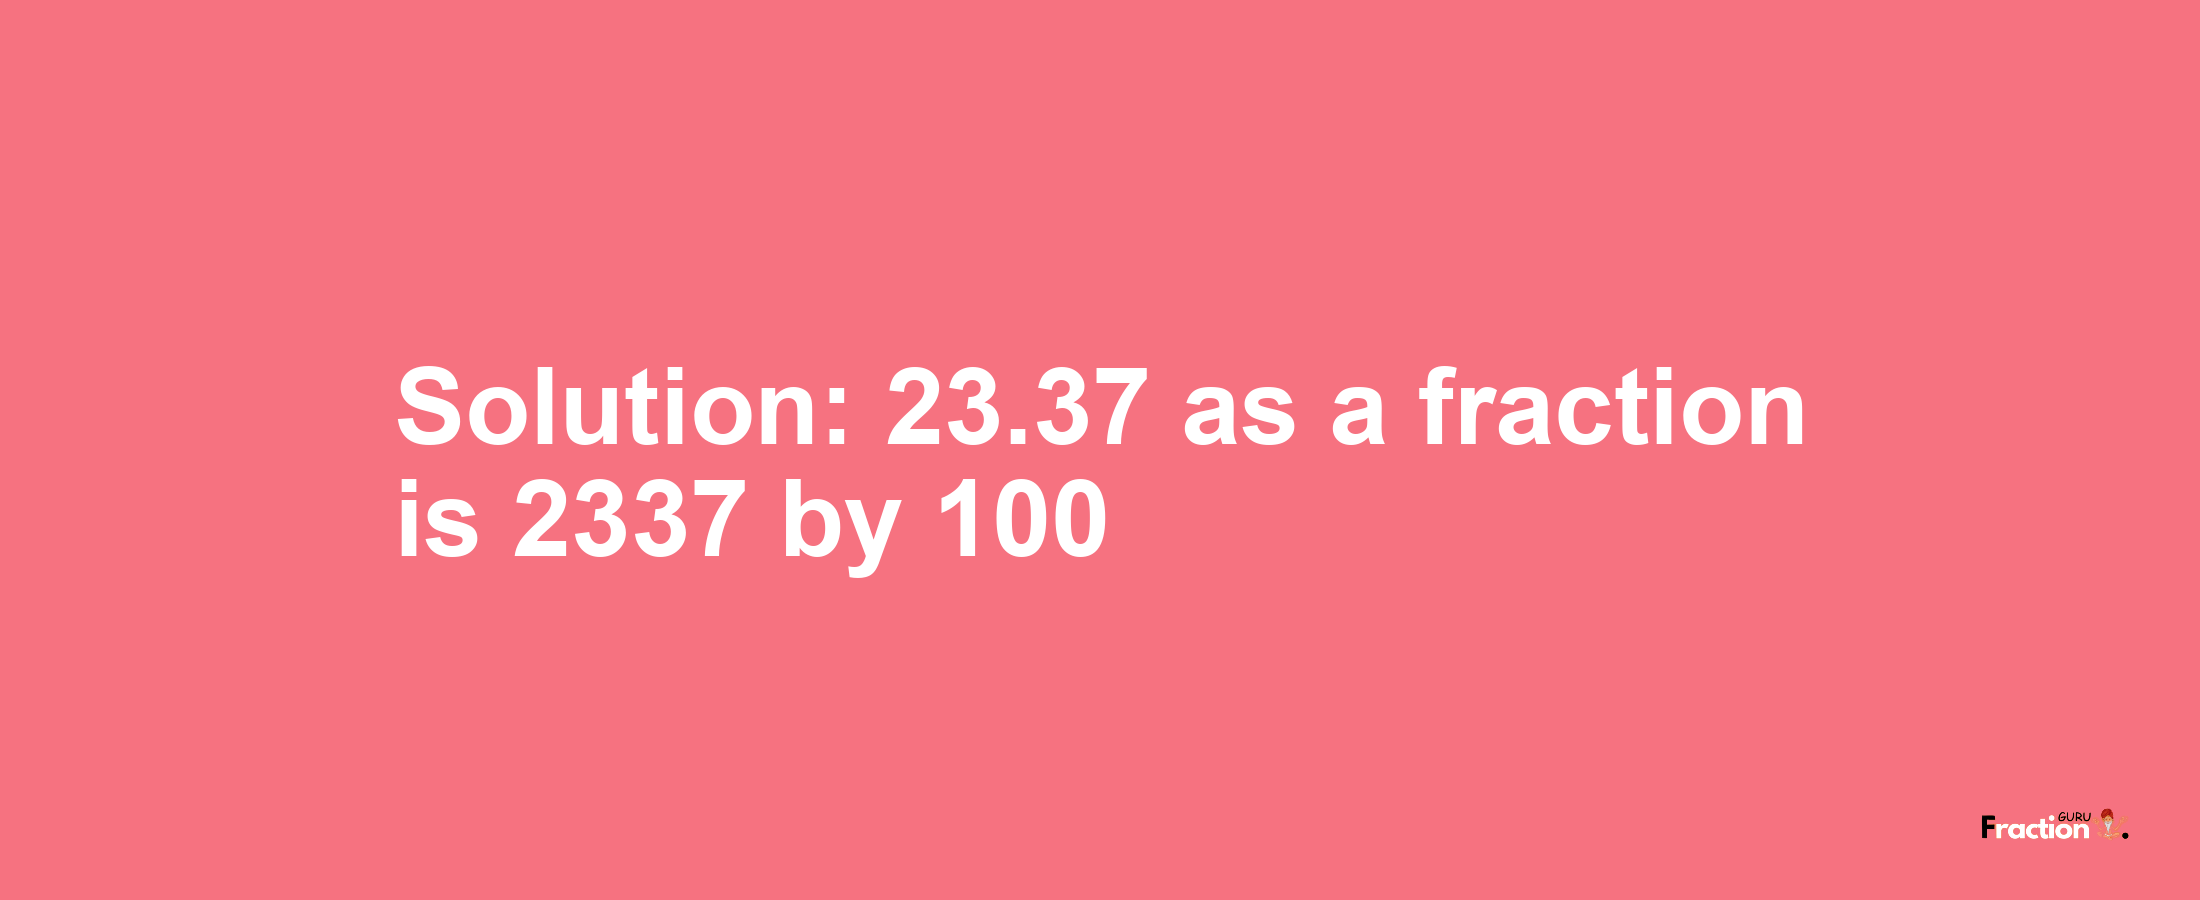 Solution:23.37 as a fraction is 2337/100